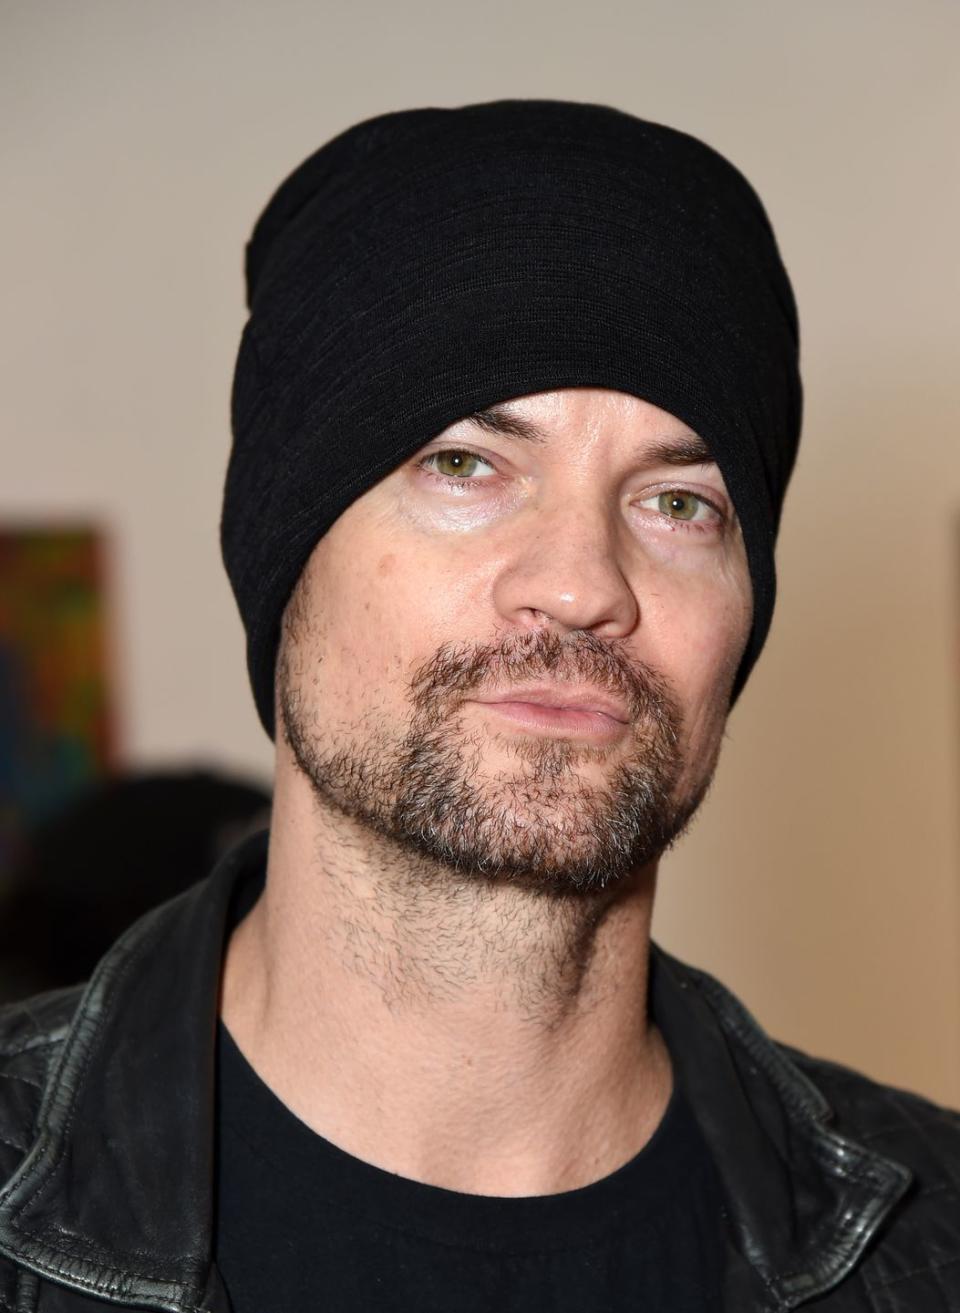 Shane West: Now